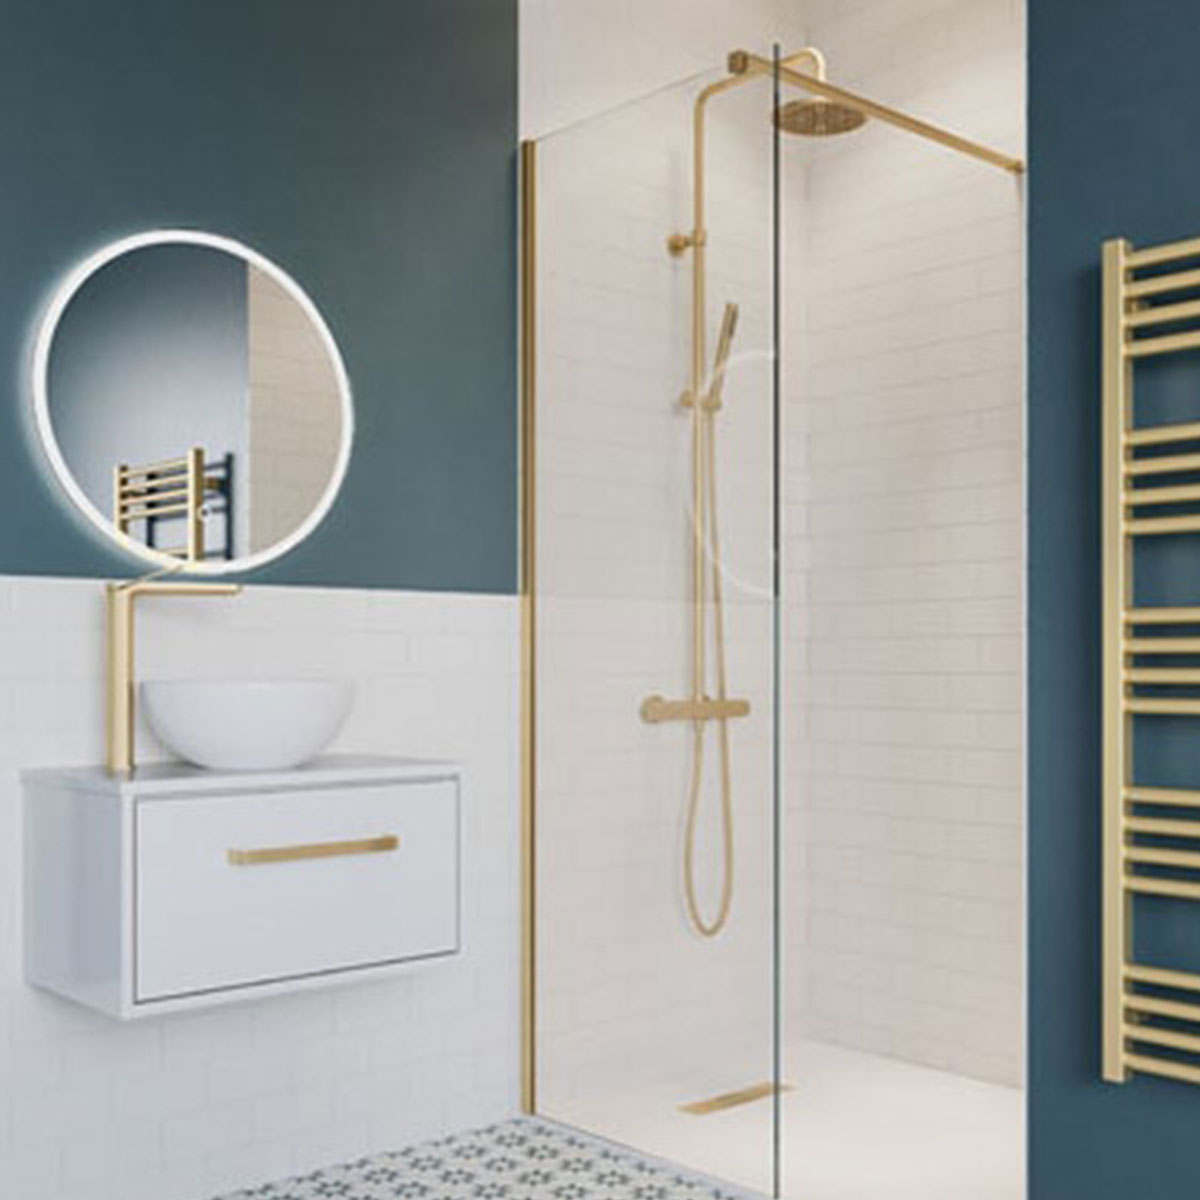 Crosswater Central Multifunction Thermostatic Shower Kit - Brushed Brass lifestyle